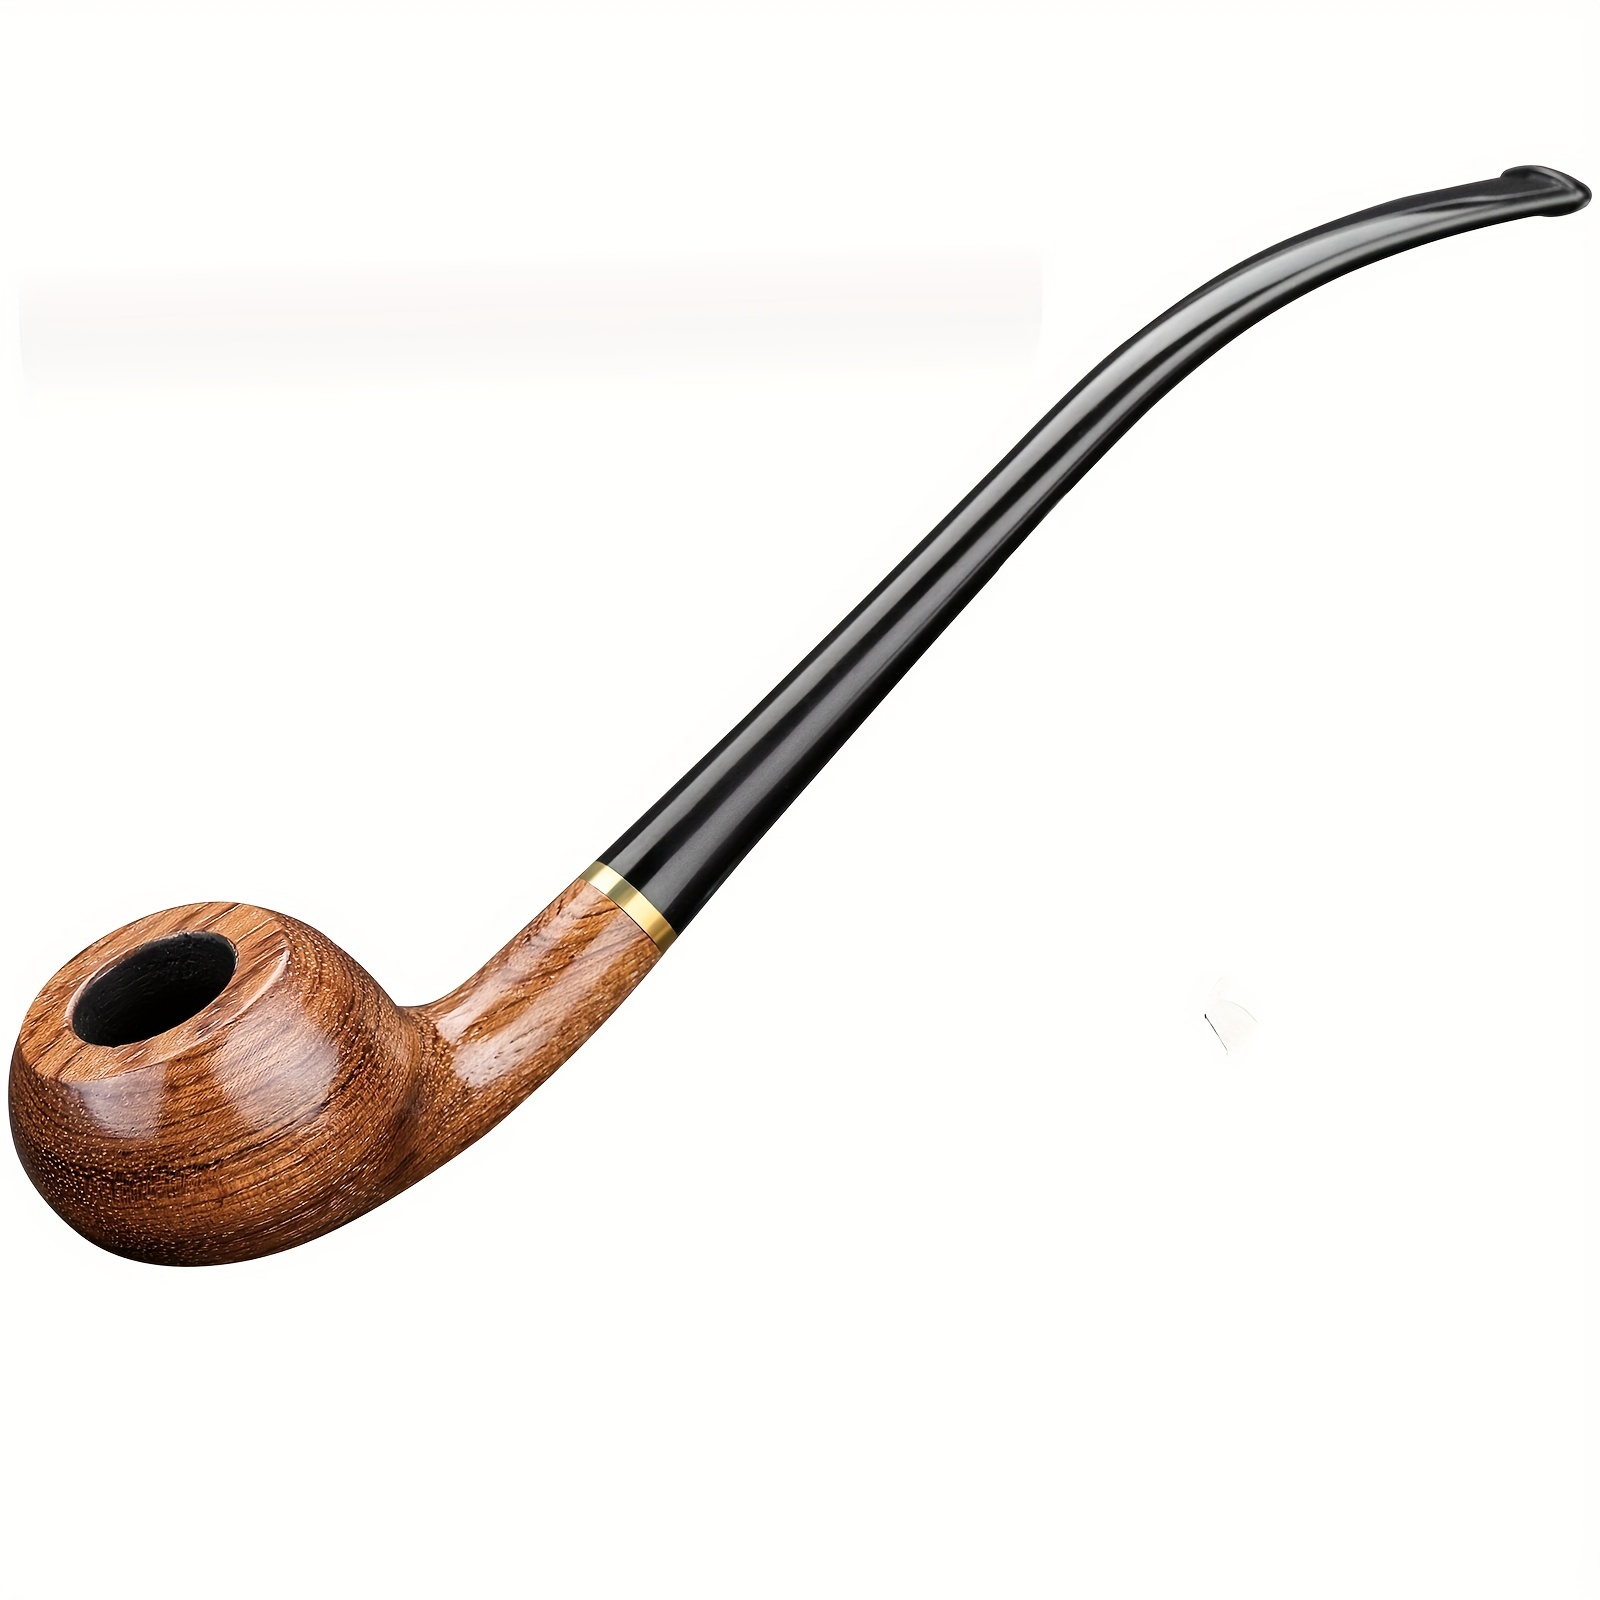 The Complete Guide to Tobacco Pipes